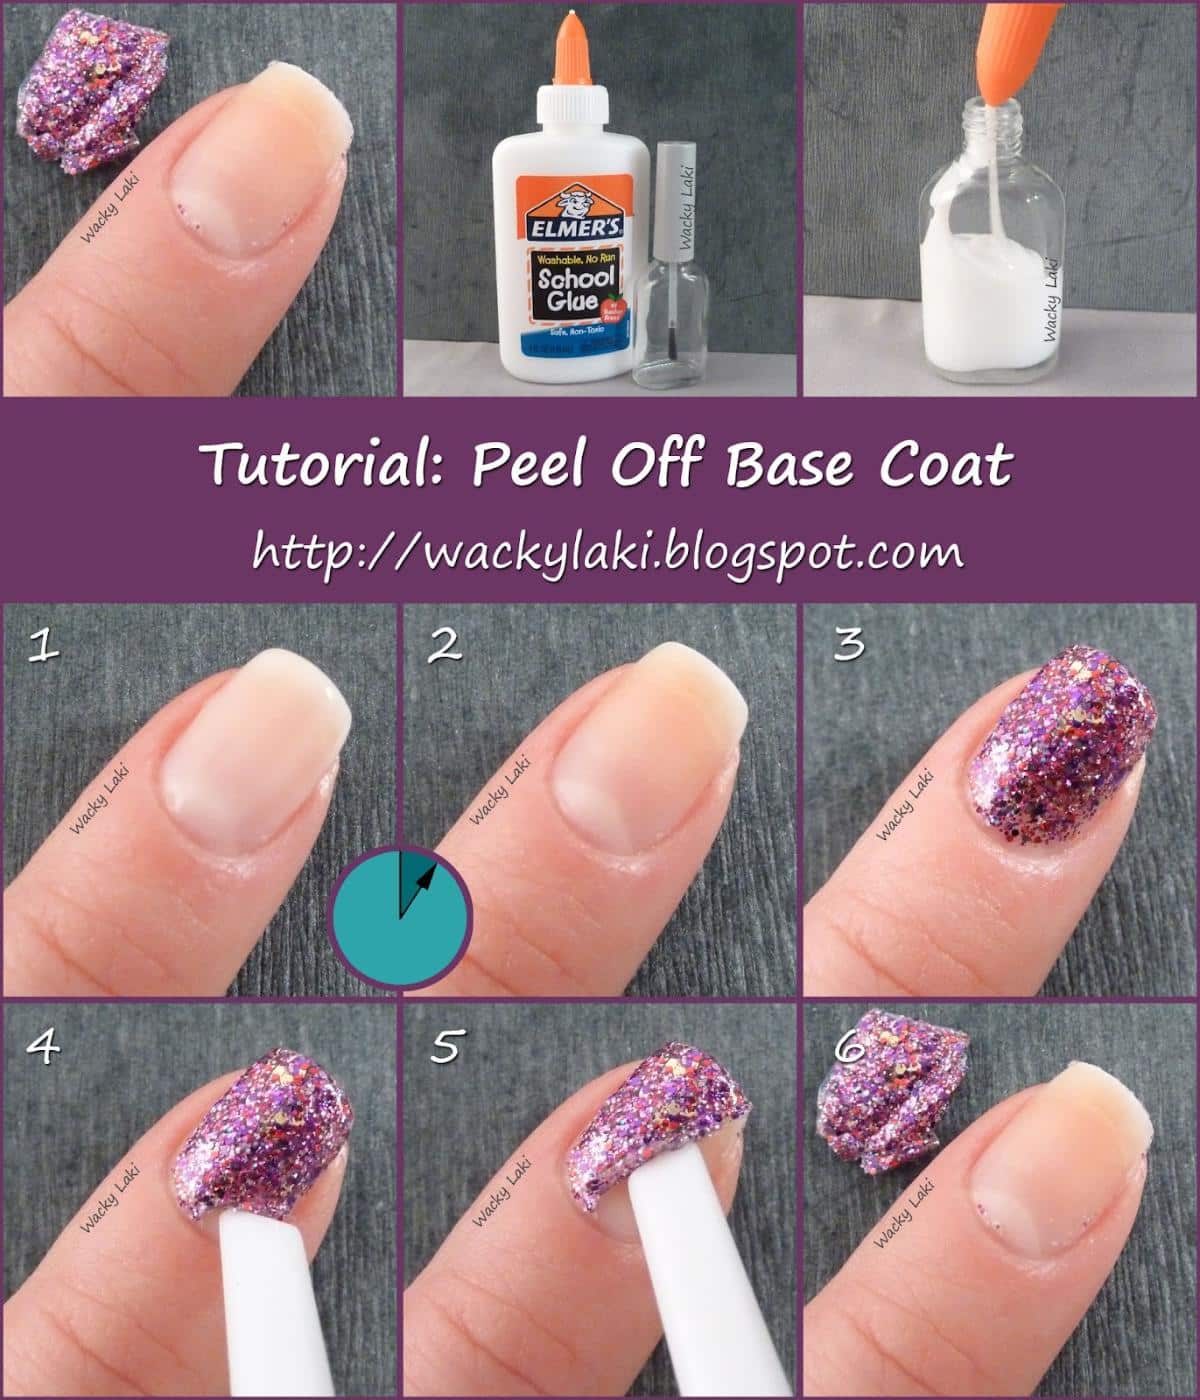 Use Glue for Easy Glitter Nail Polish Removal collage.